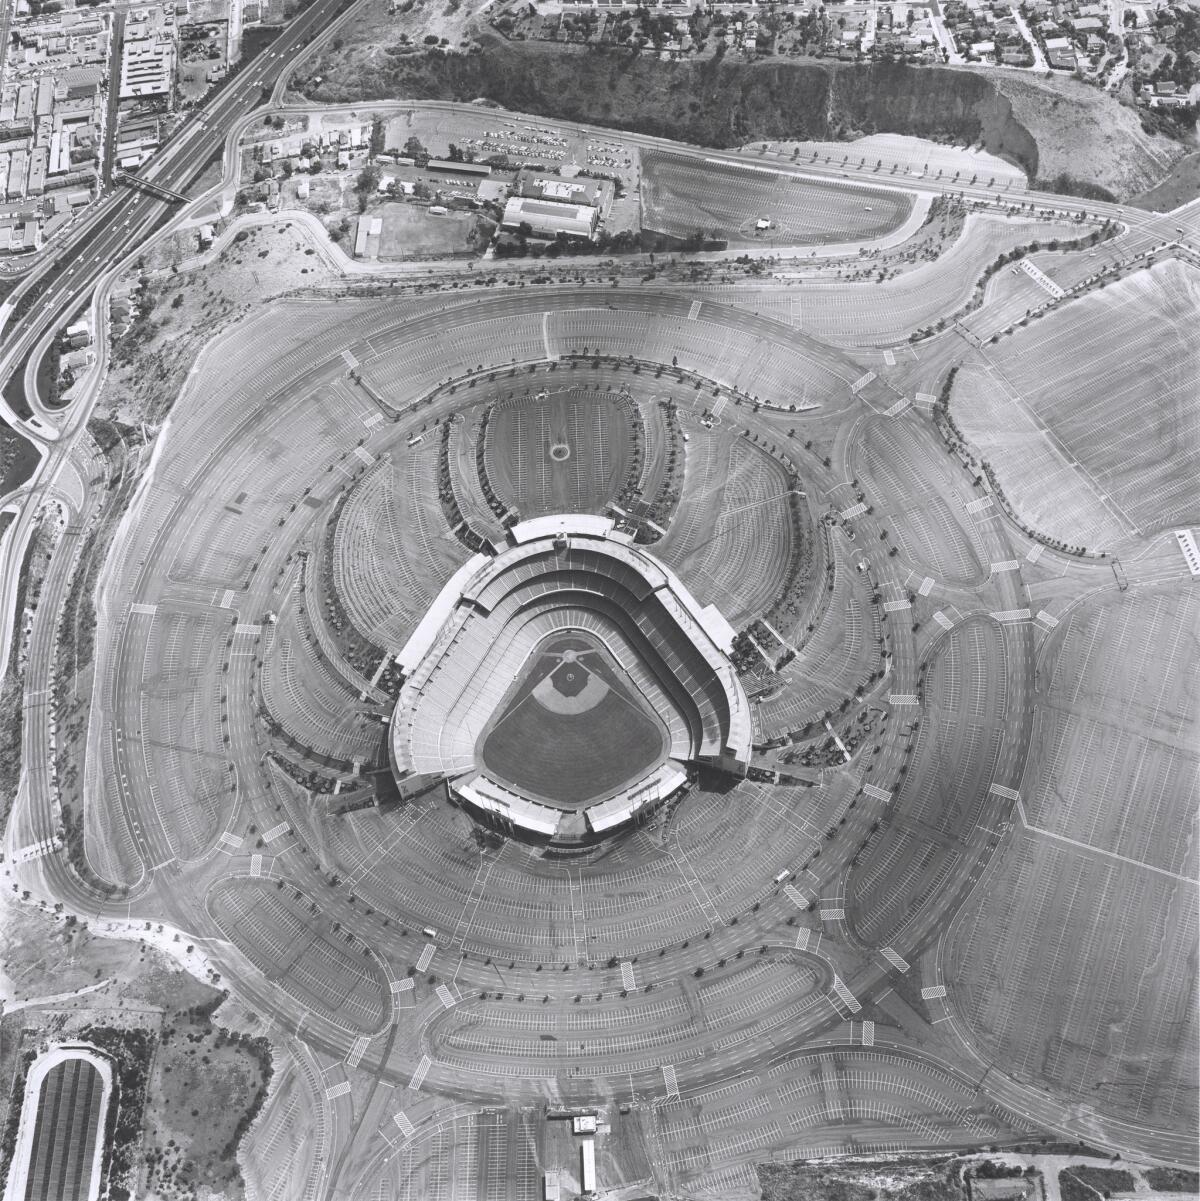 Ed Ruscha's "Dodger Stadium, " 1000 Elysian Park Ave., 1967, from "Parking Lots," series published in 1999. (Fine Arts Museums of San Francisco)